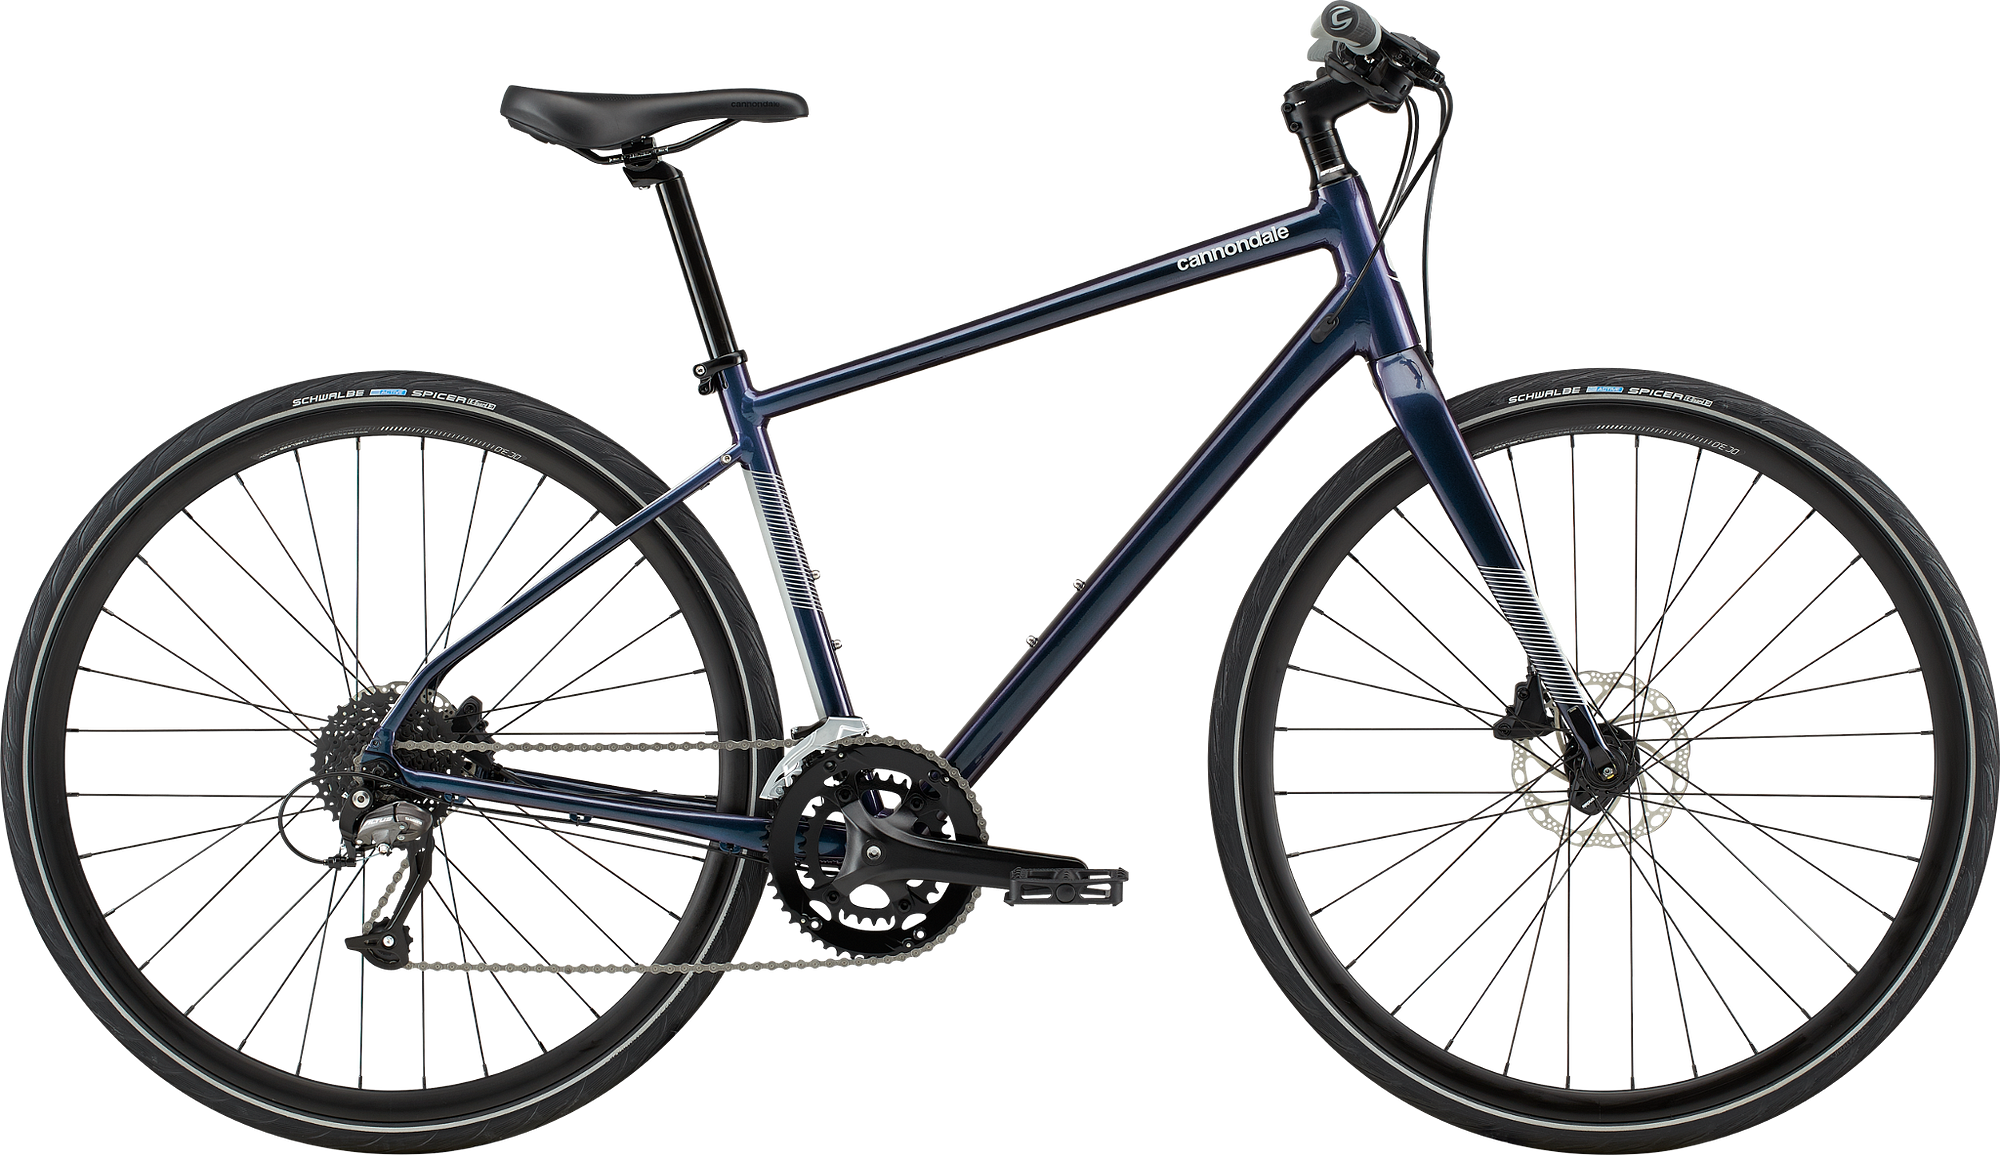 Quick 4 | Fitness Bikes | Cannondale